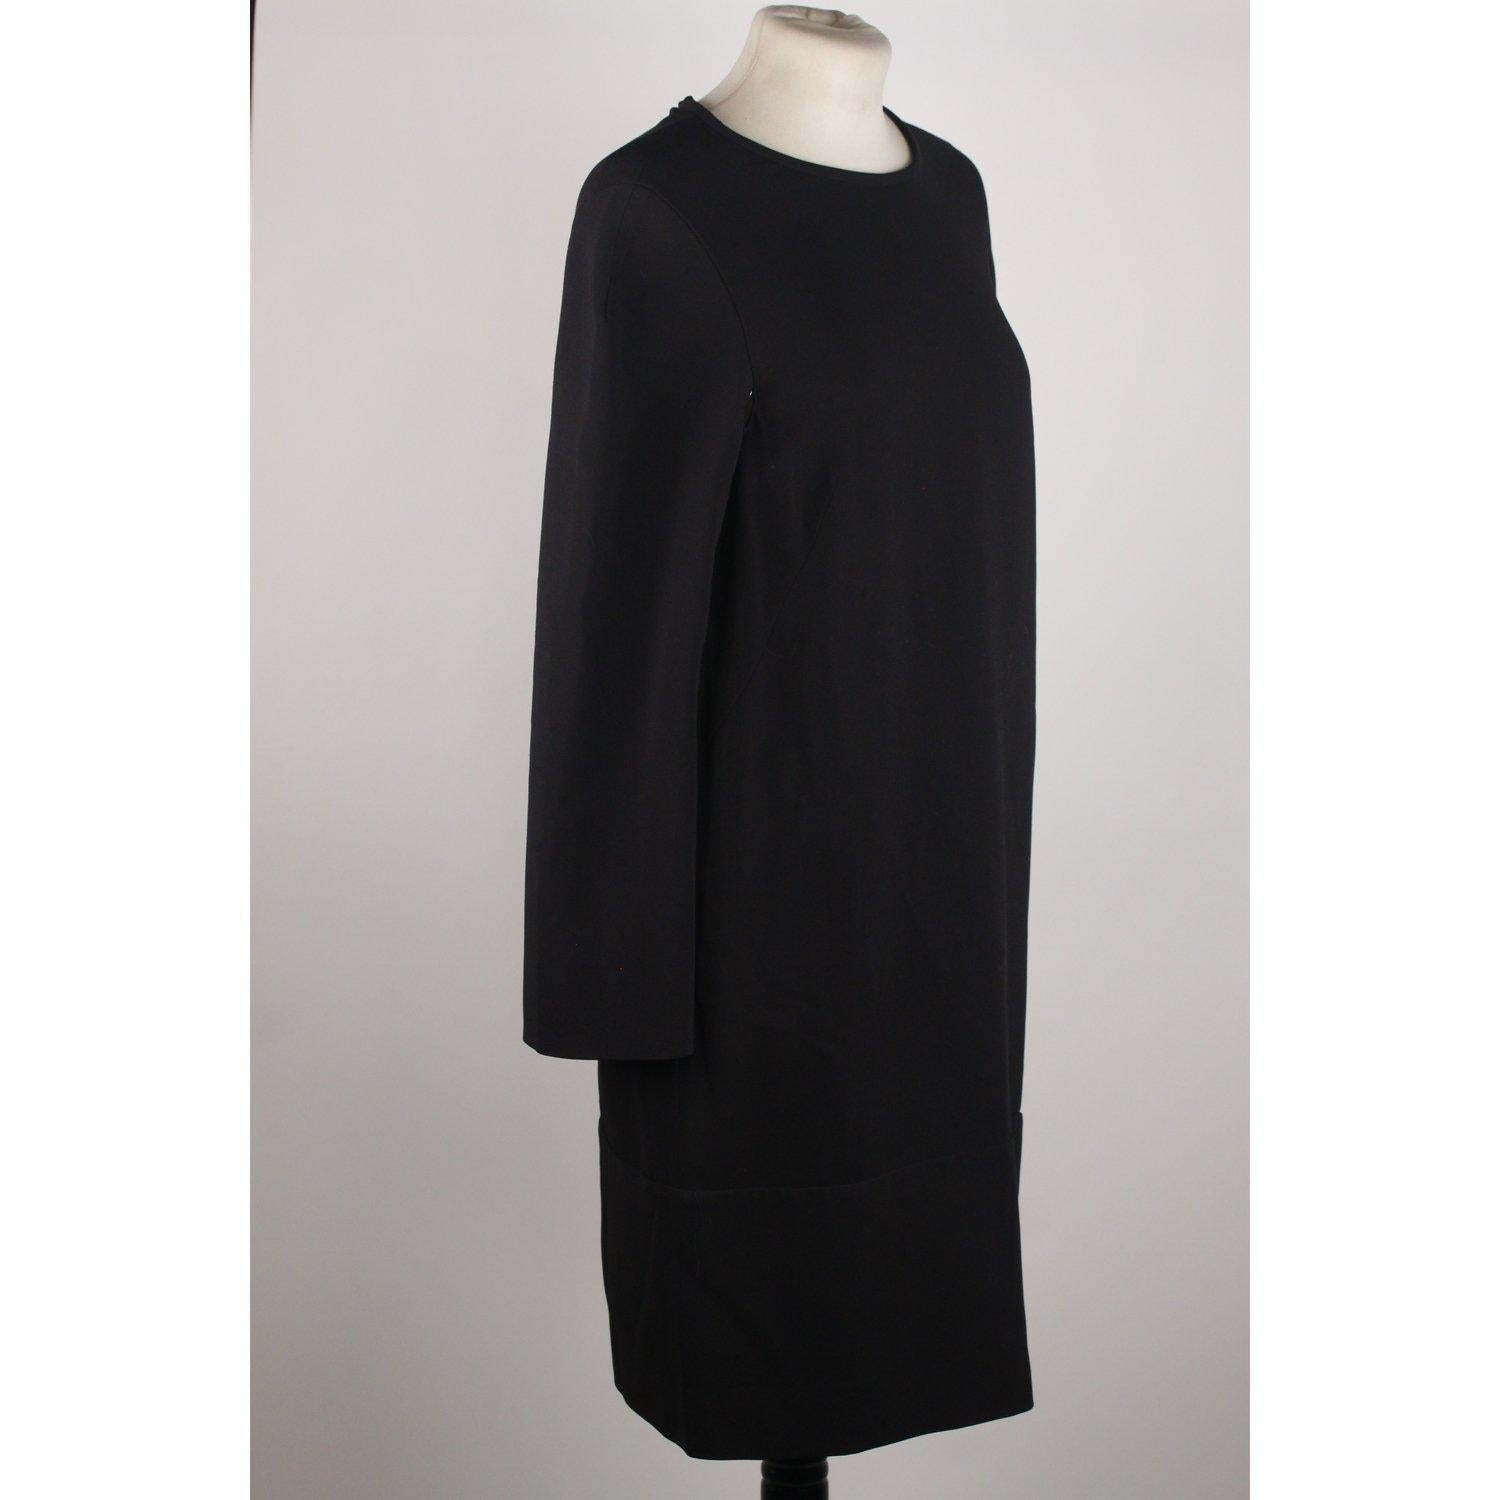 MATERIAL: Viscose COLOR: Black MODEL: Sleeveless Dress GENDER: Women SIZE: Small COUNTRY OF MANUFACTURE: Unknown Condition CONDITION DETAILS: B :GOOD CONDITION - Some light wear of use - Previously worn with moderate wash wear/fade and or minor